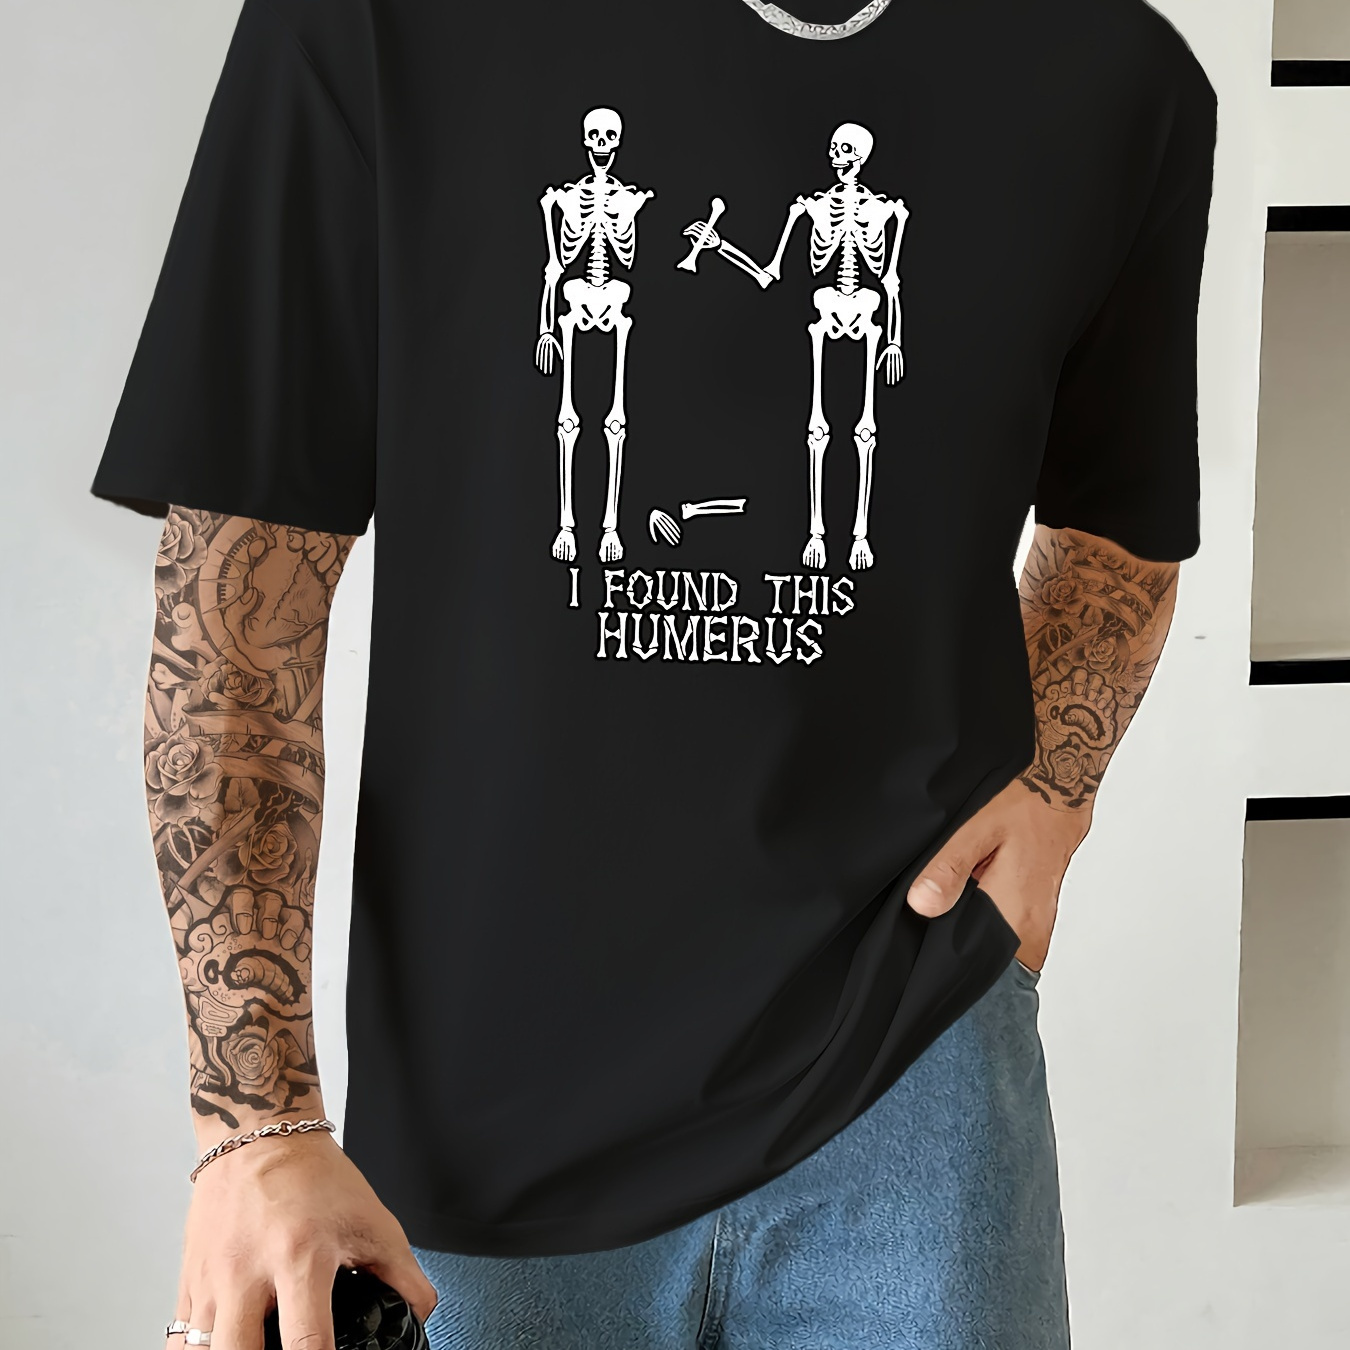 

I Found This And Skeletons Graphic Print, Men's Casual Fit T-shirt, Cool Tee Top Clothes For Men For Summer For Everyday Activities